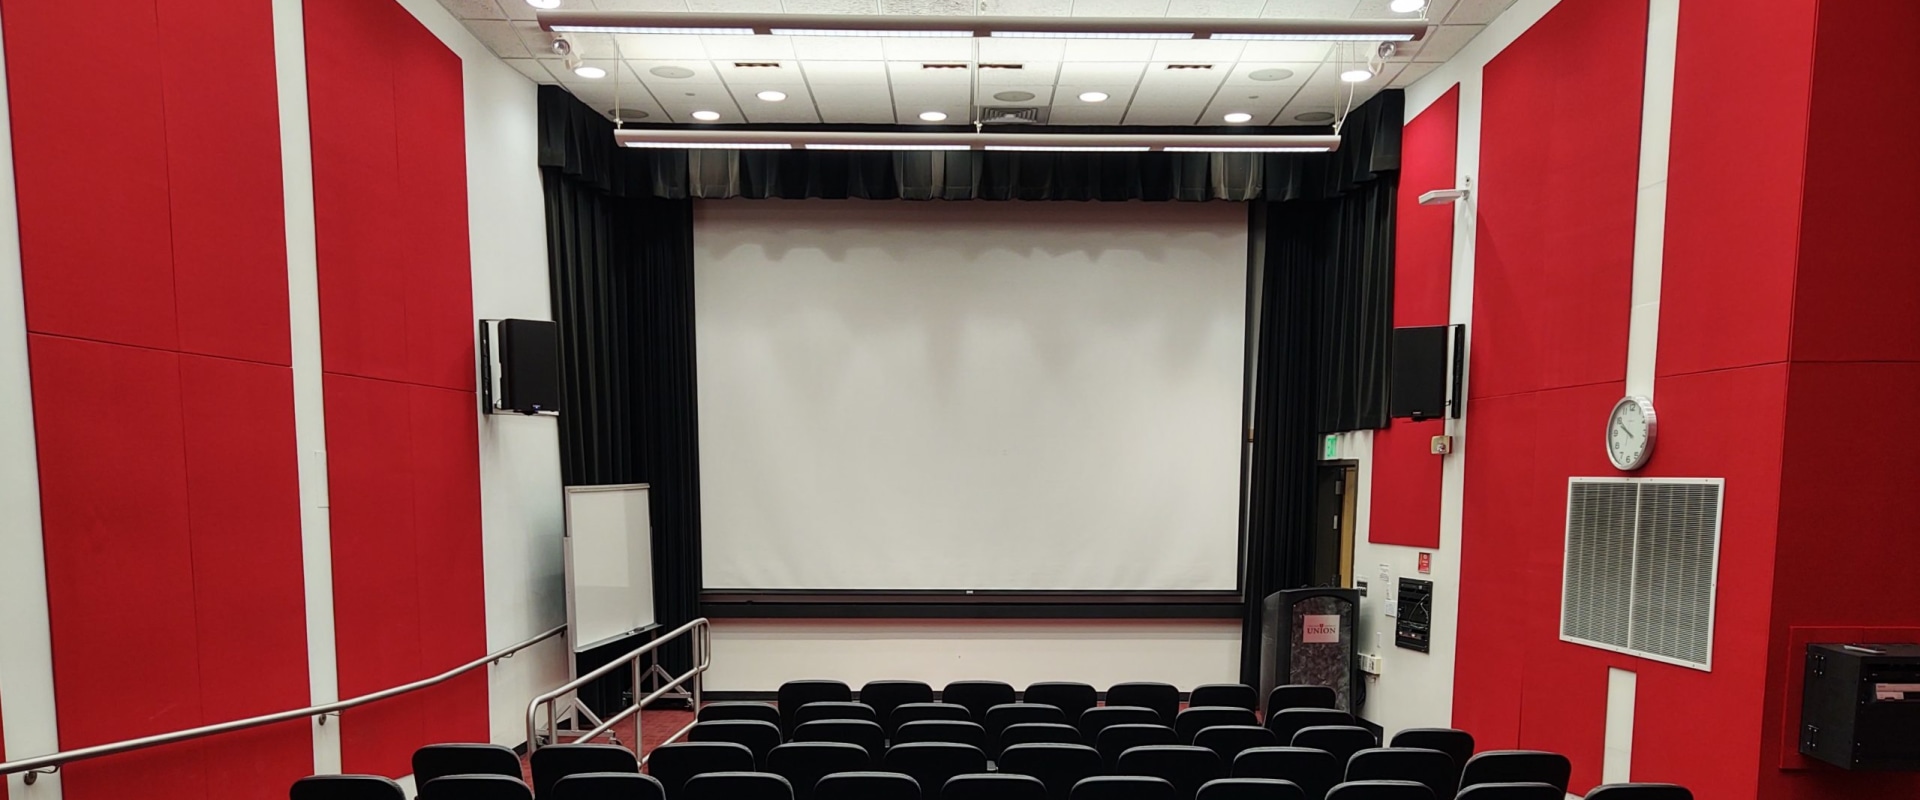 Exploring the Theatres in South Jordan, UT: Student Discounts and More